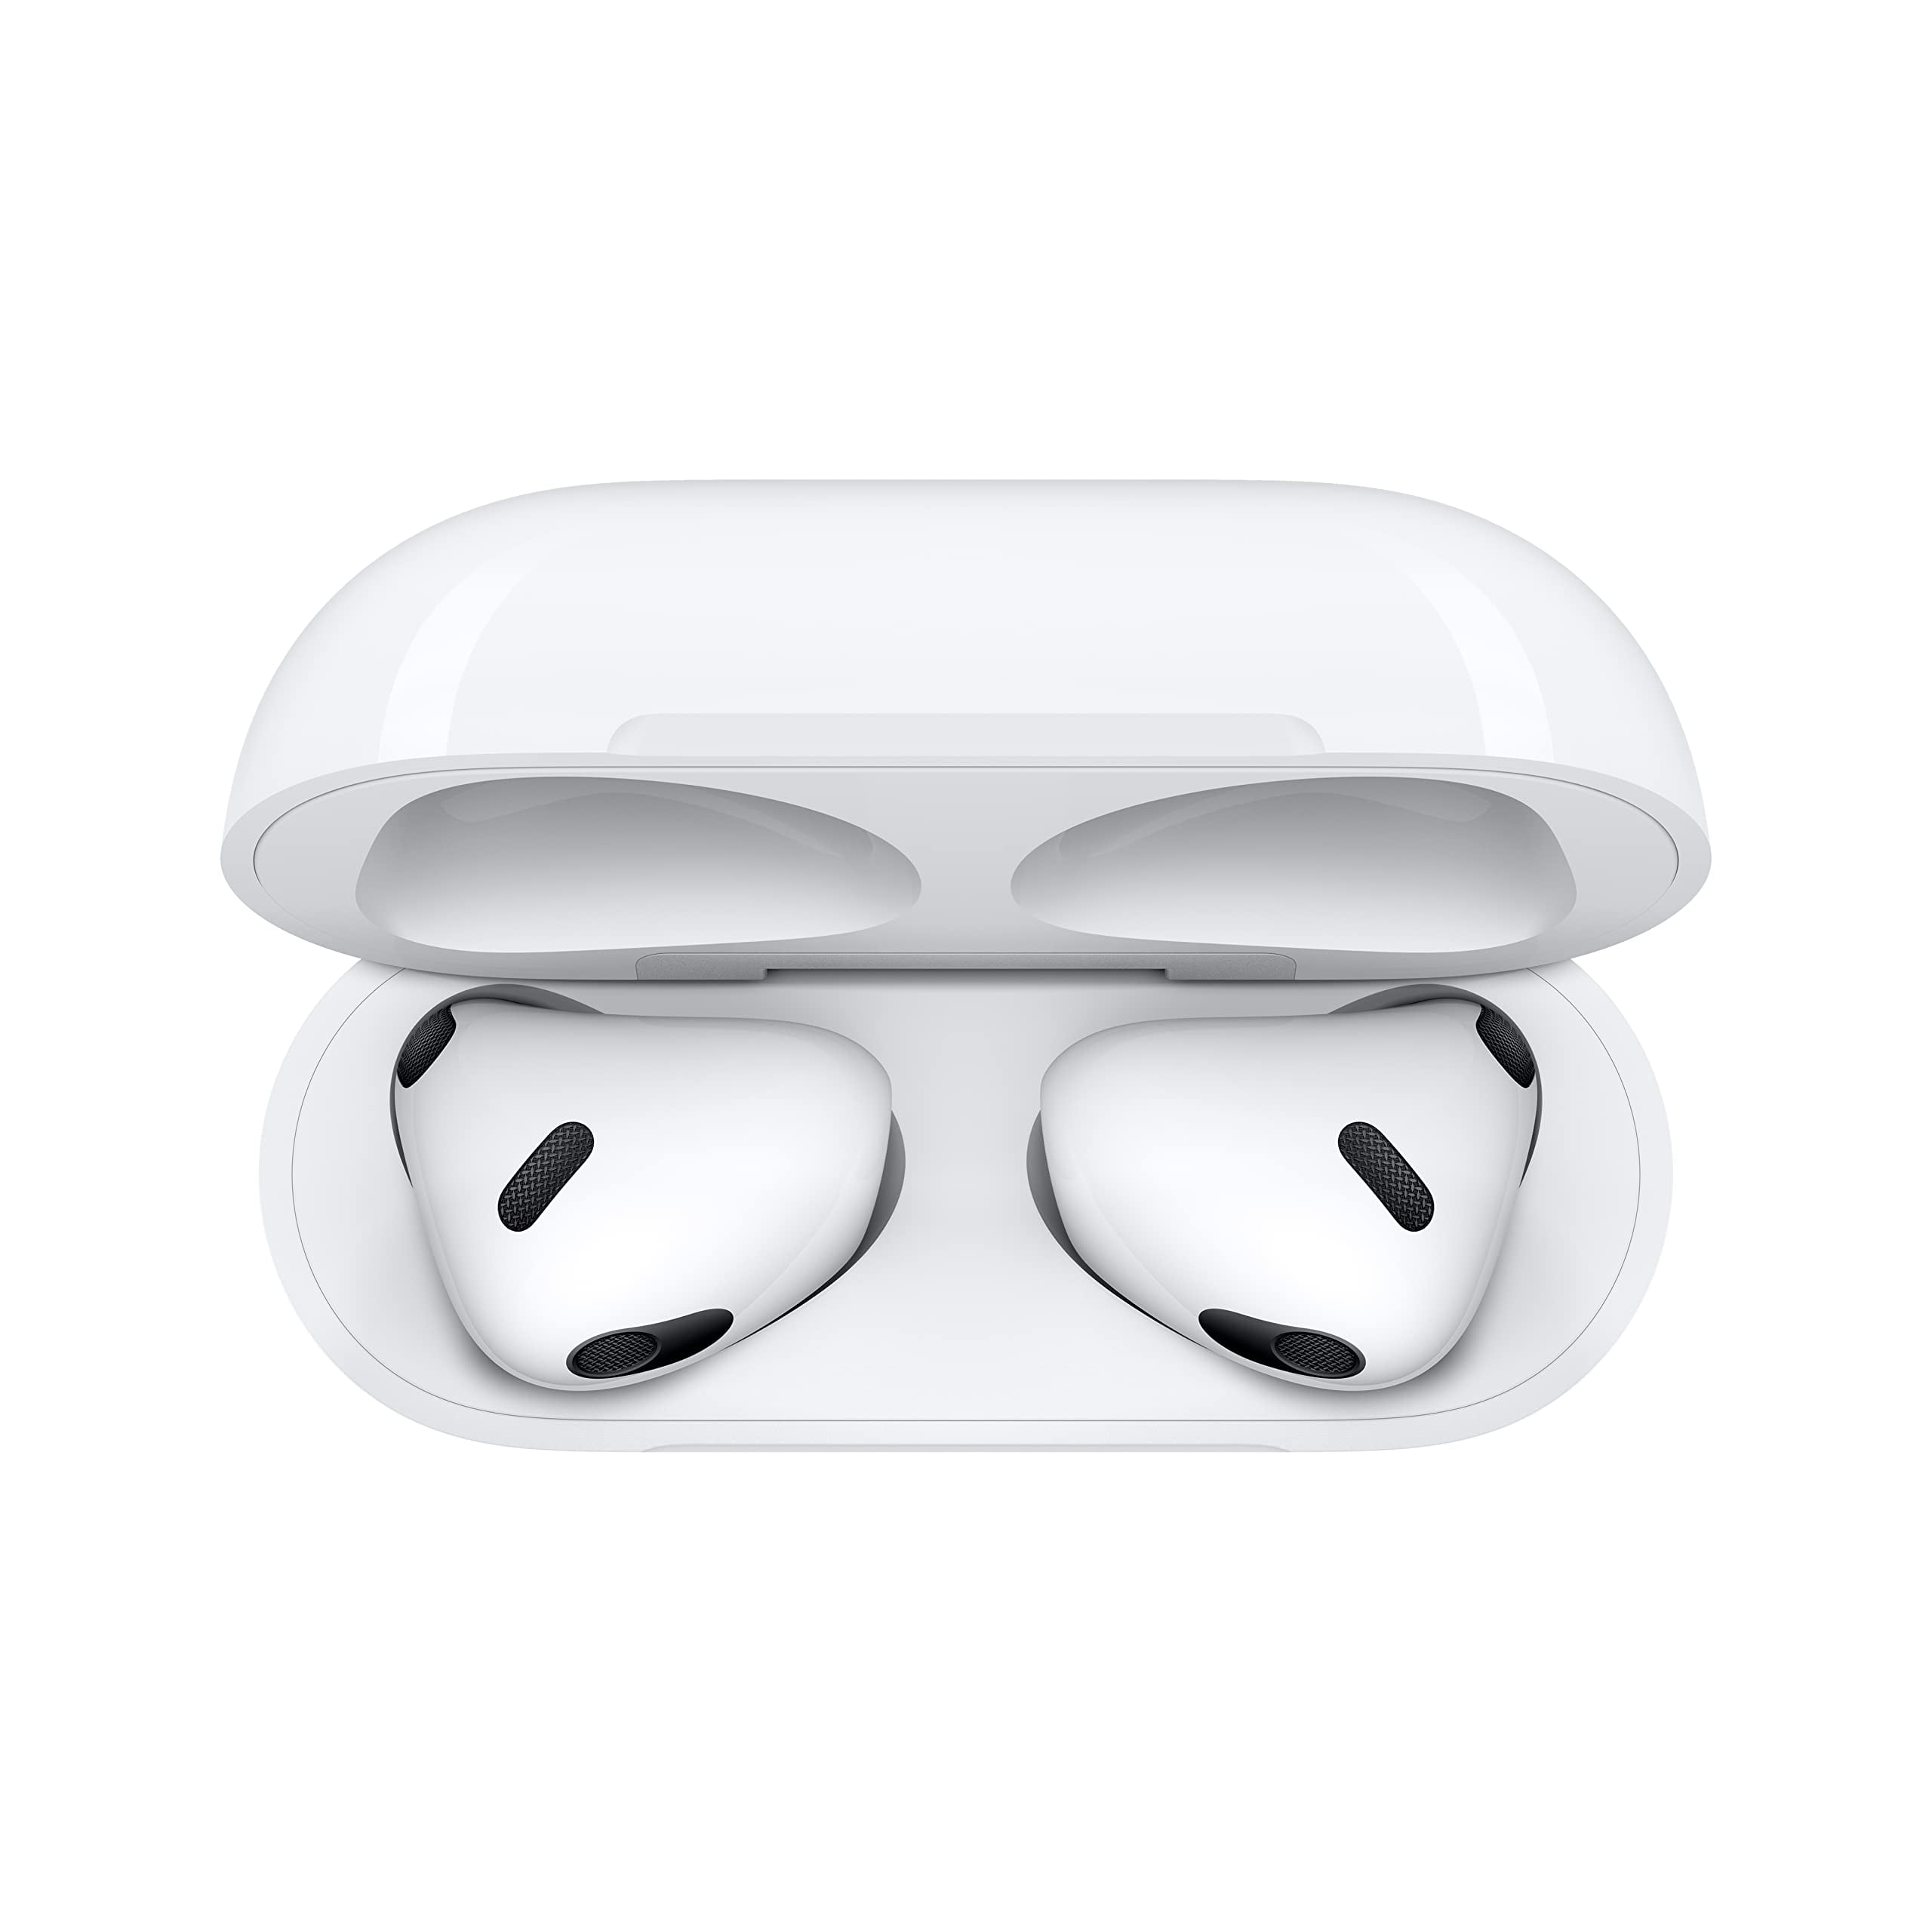 Apple AirPods (3rd Generation) Wireless Earbuds with Lightning